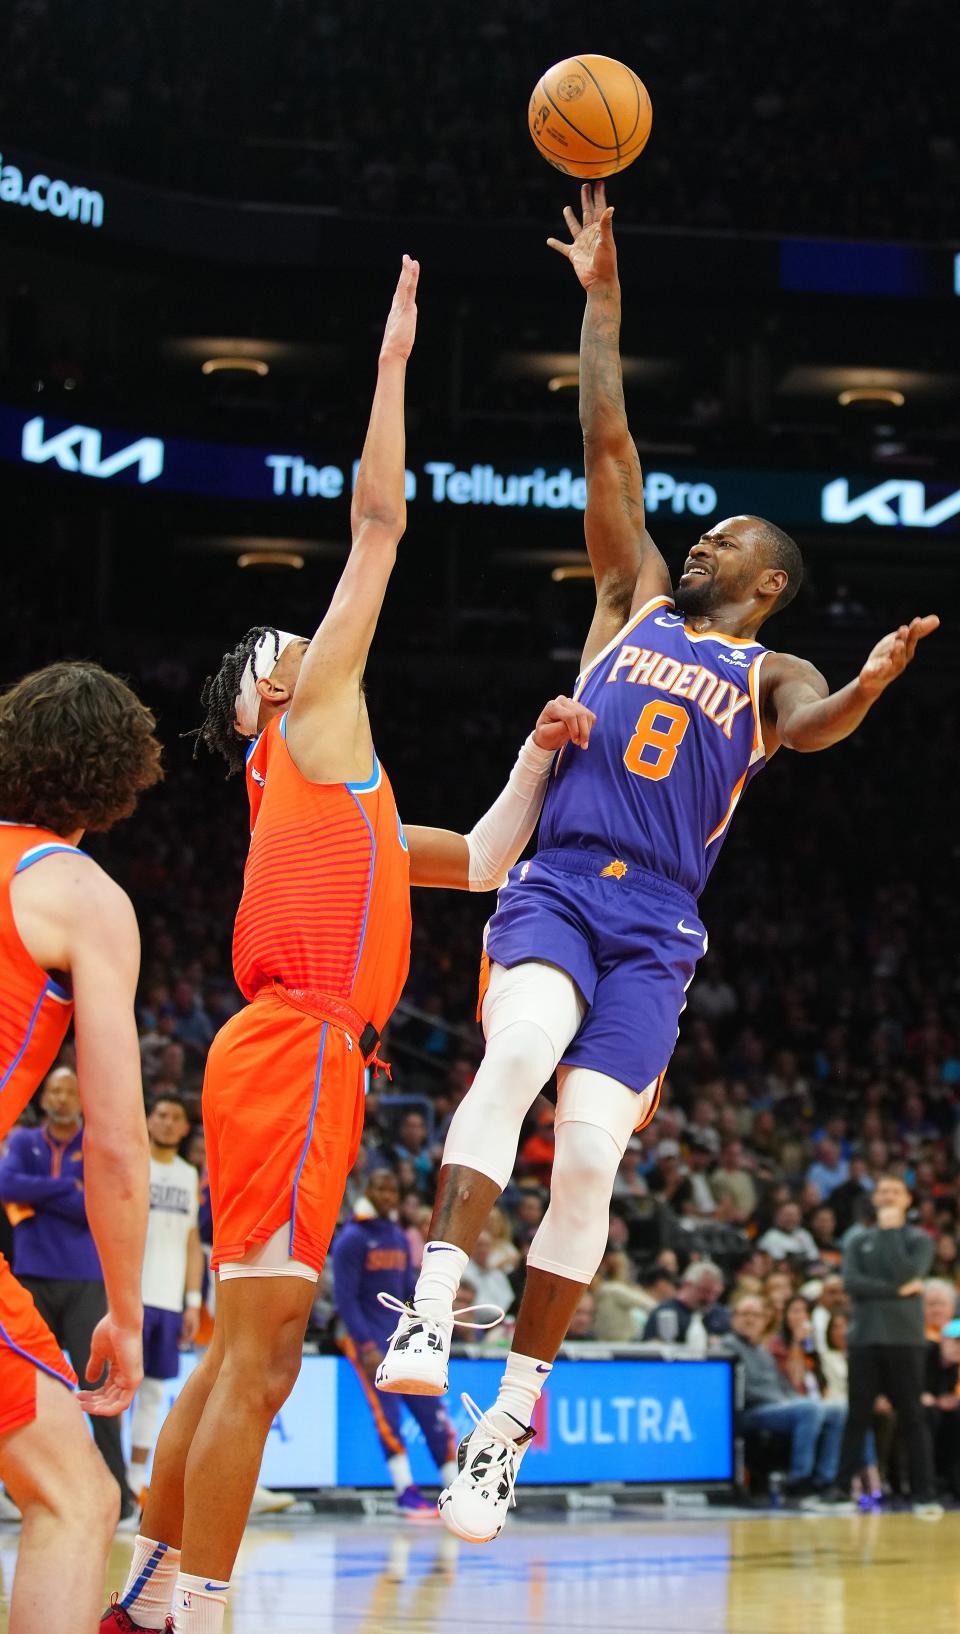 Suns guard Terrence Ross (8) shoots against the Thunder during the first half at the Footprint Center in Phoenix on March 8, 2023.